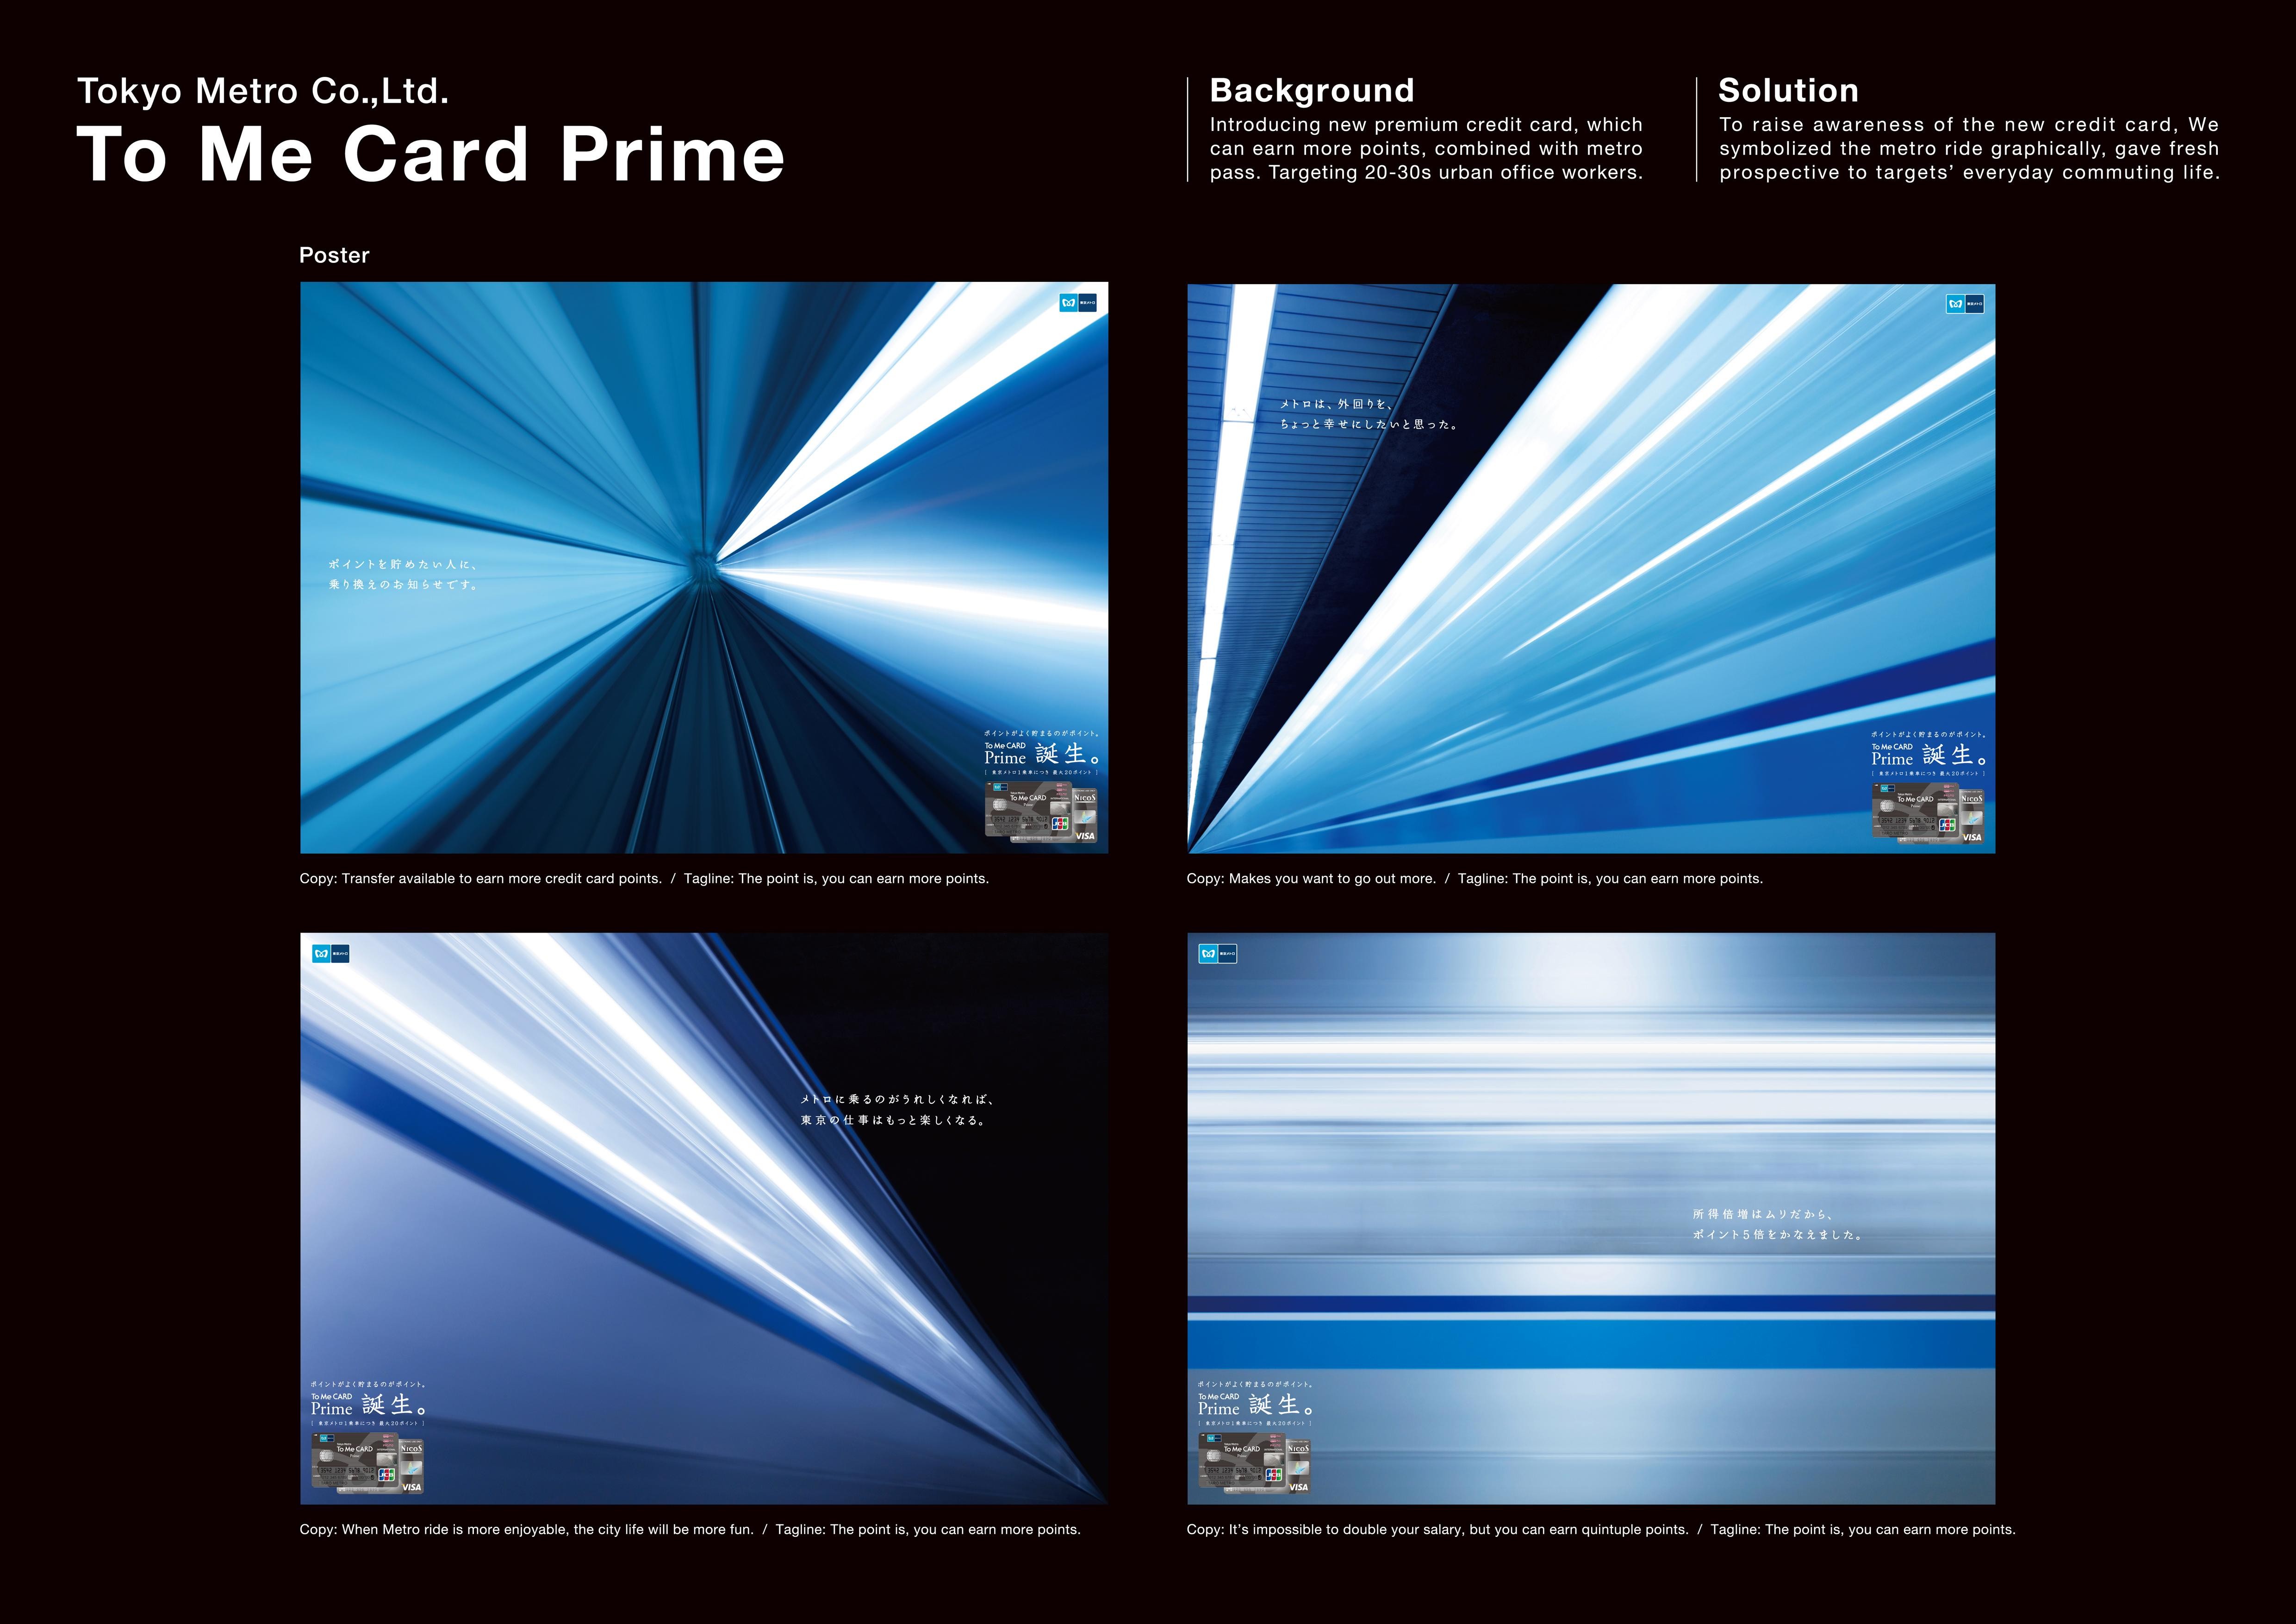 TO ME CARD PRIME